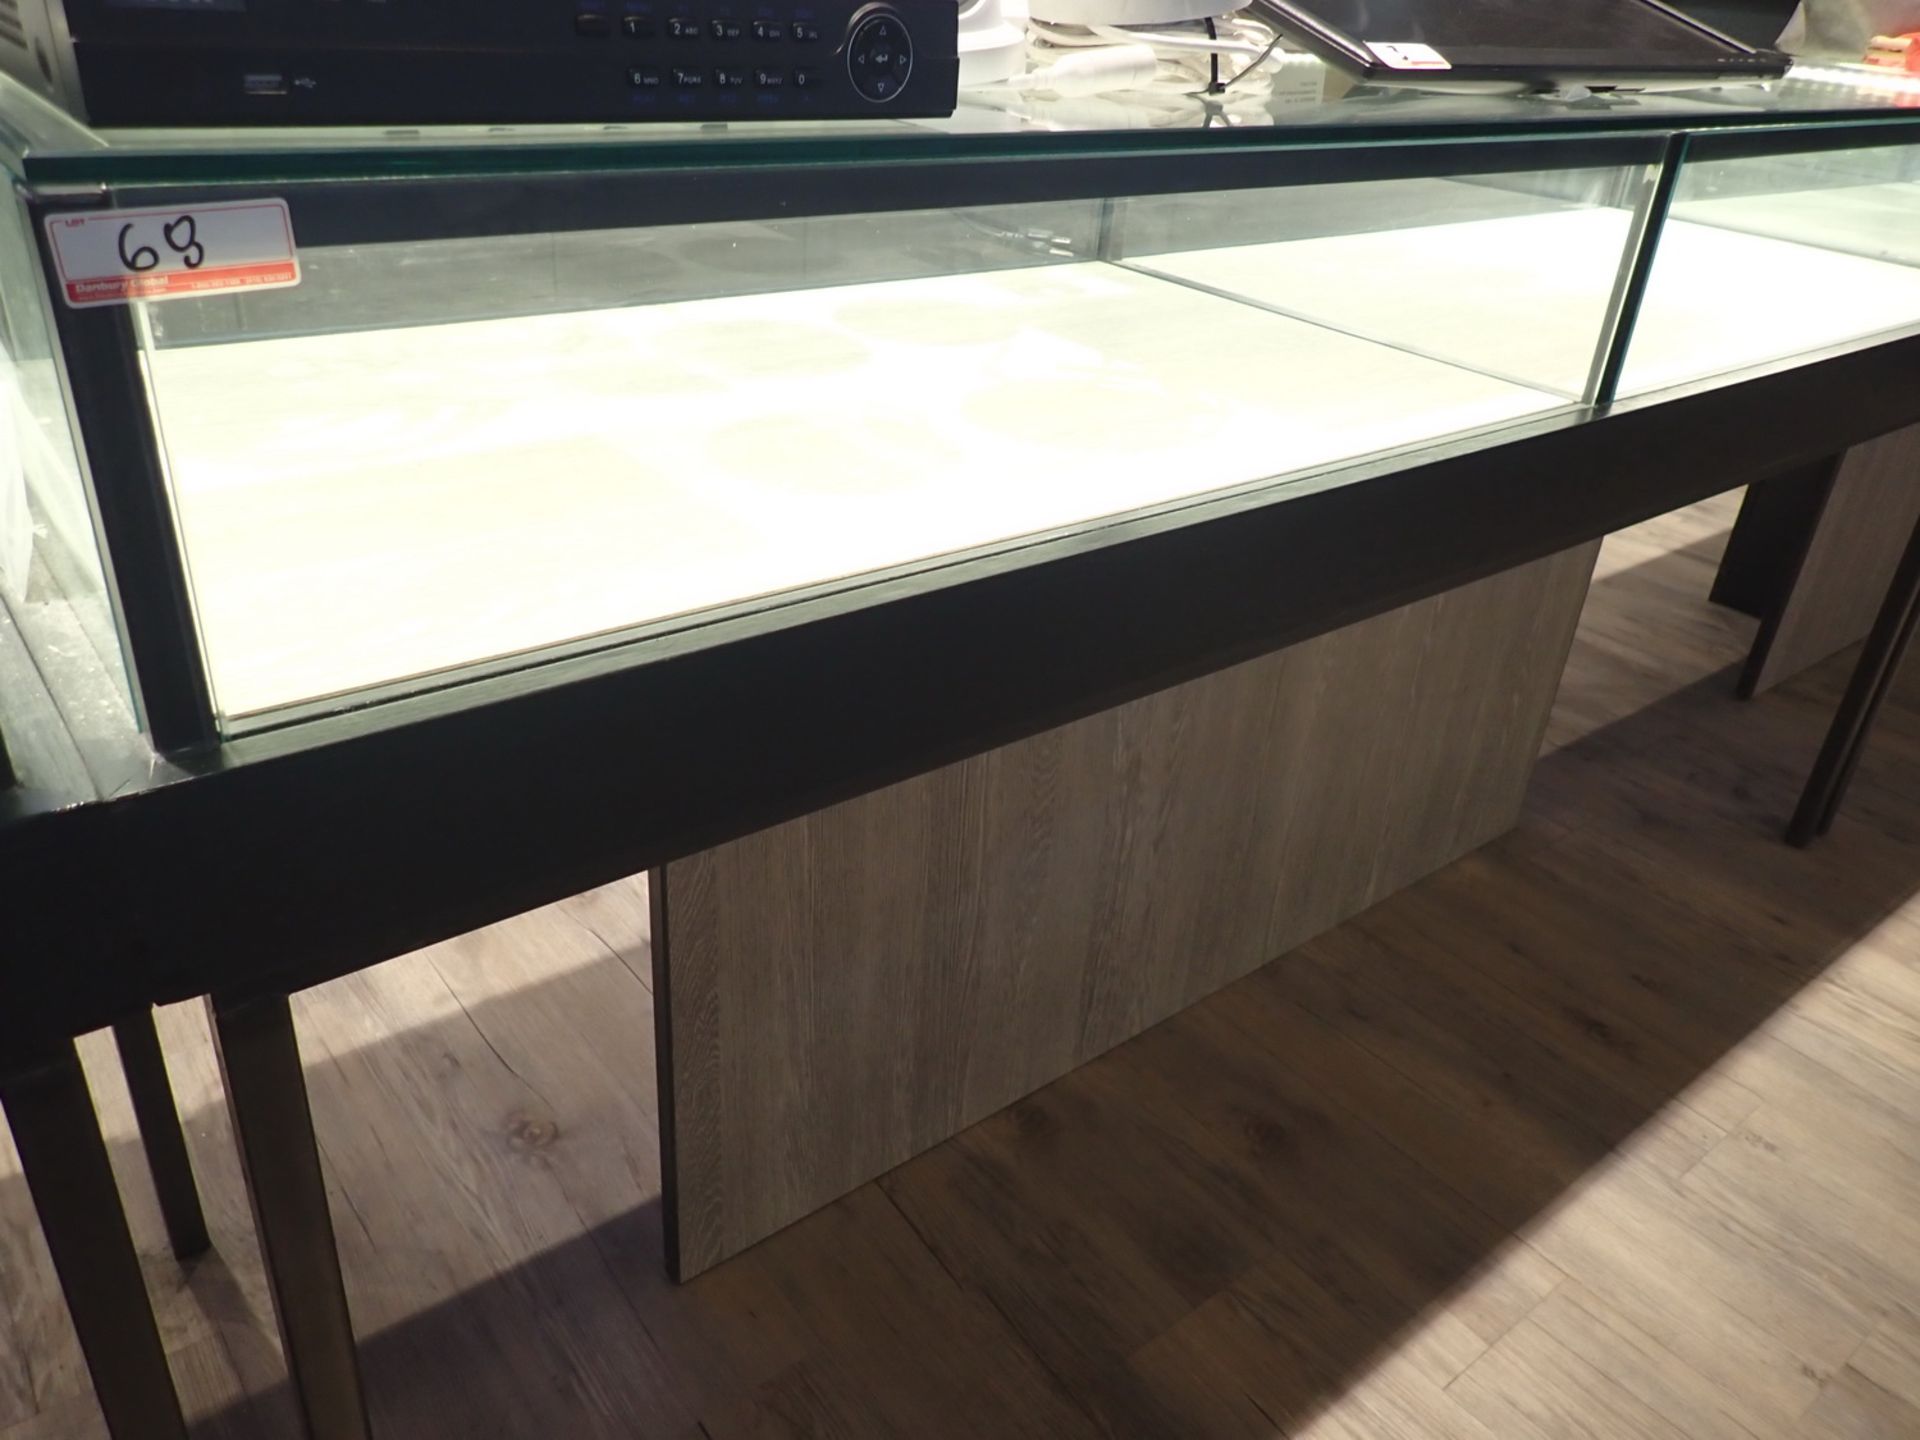 GLASS 6' X 20" X 36" DISPLAY CASE / RETAIL COUNTER W/ INTEGRATED LED LIGHTS (110V) & LOCKABLE PULL-